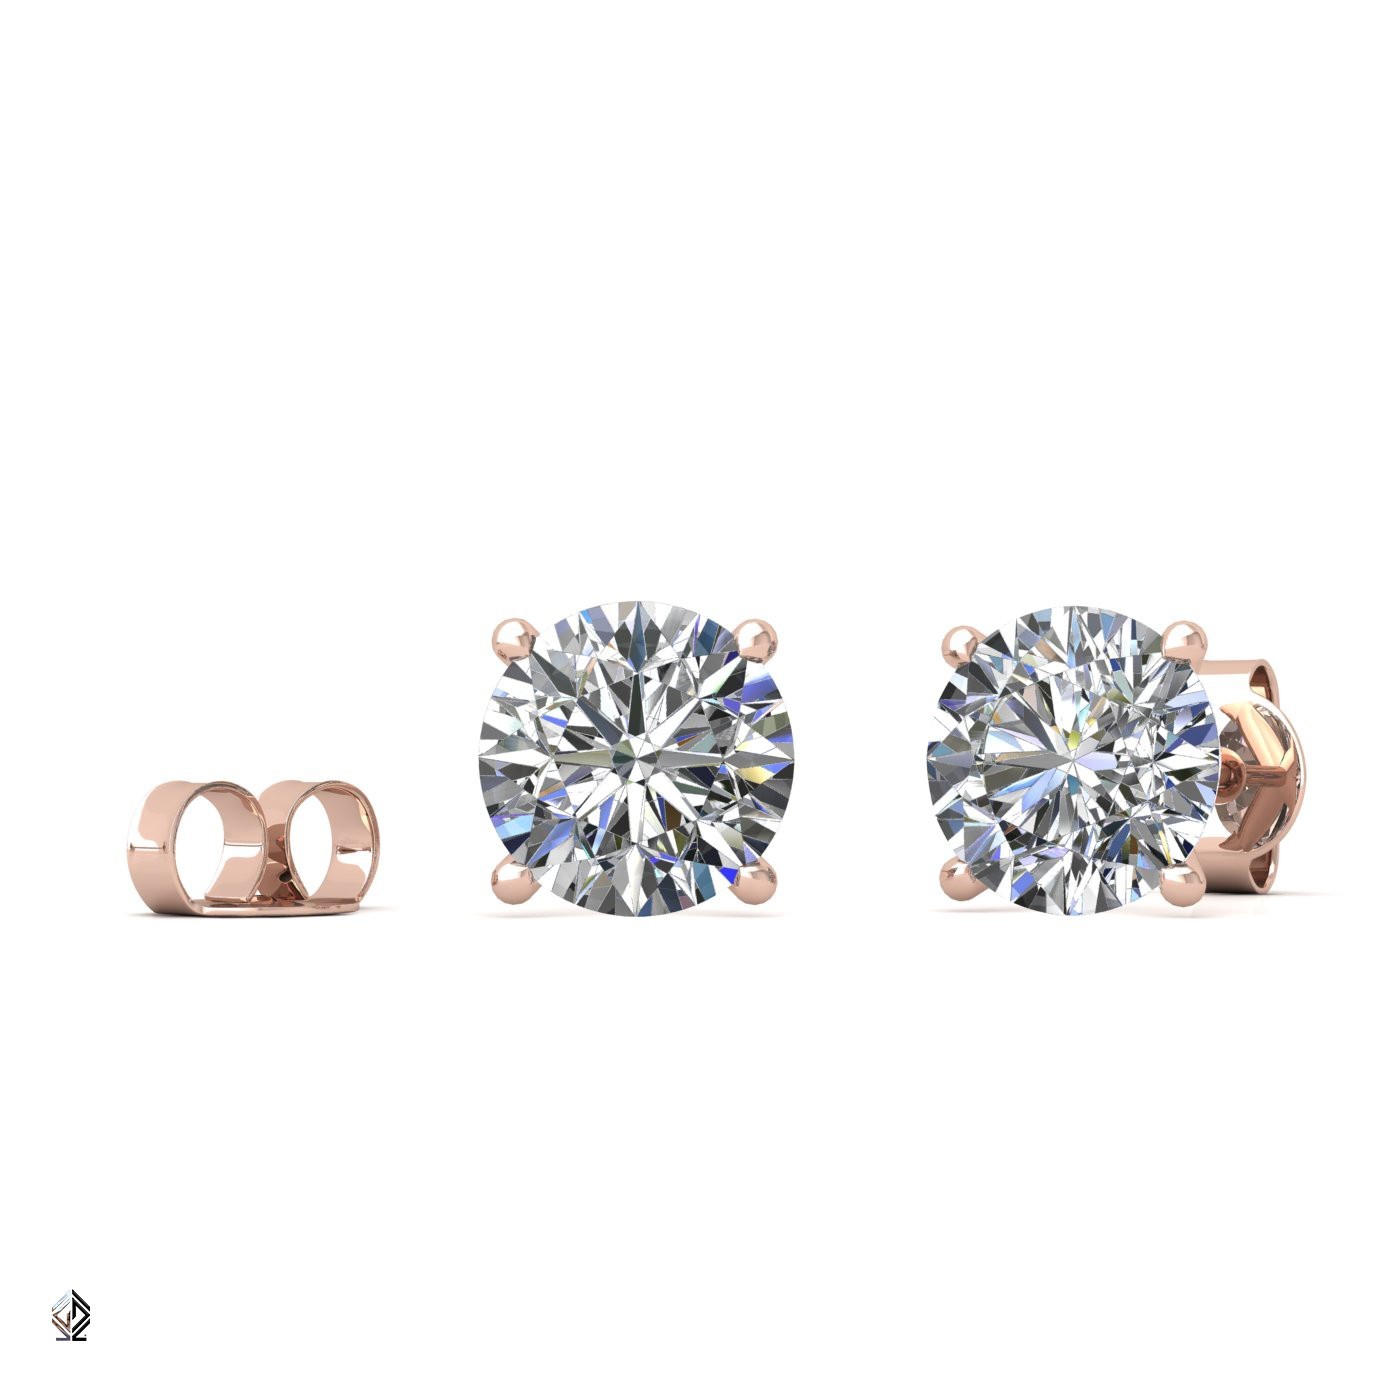 18k yellow gold 1.0 ct each (2,0 tcw) 4 prongs round cut classic diamond earring studs Photos & images